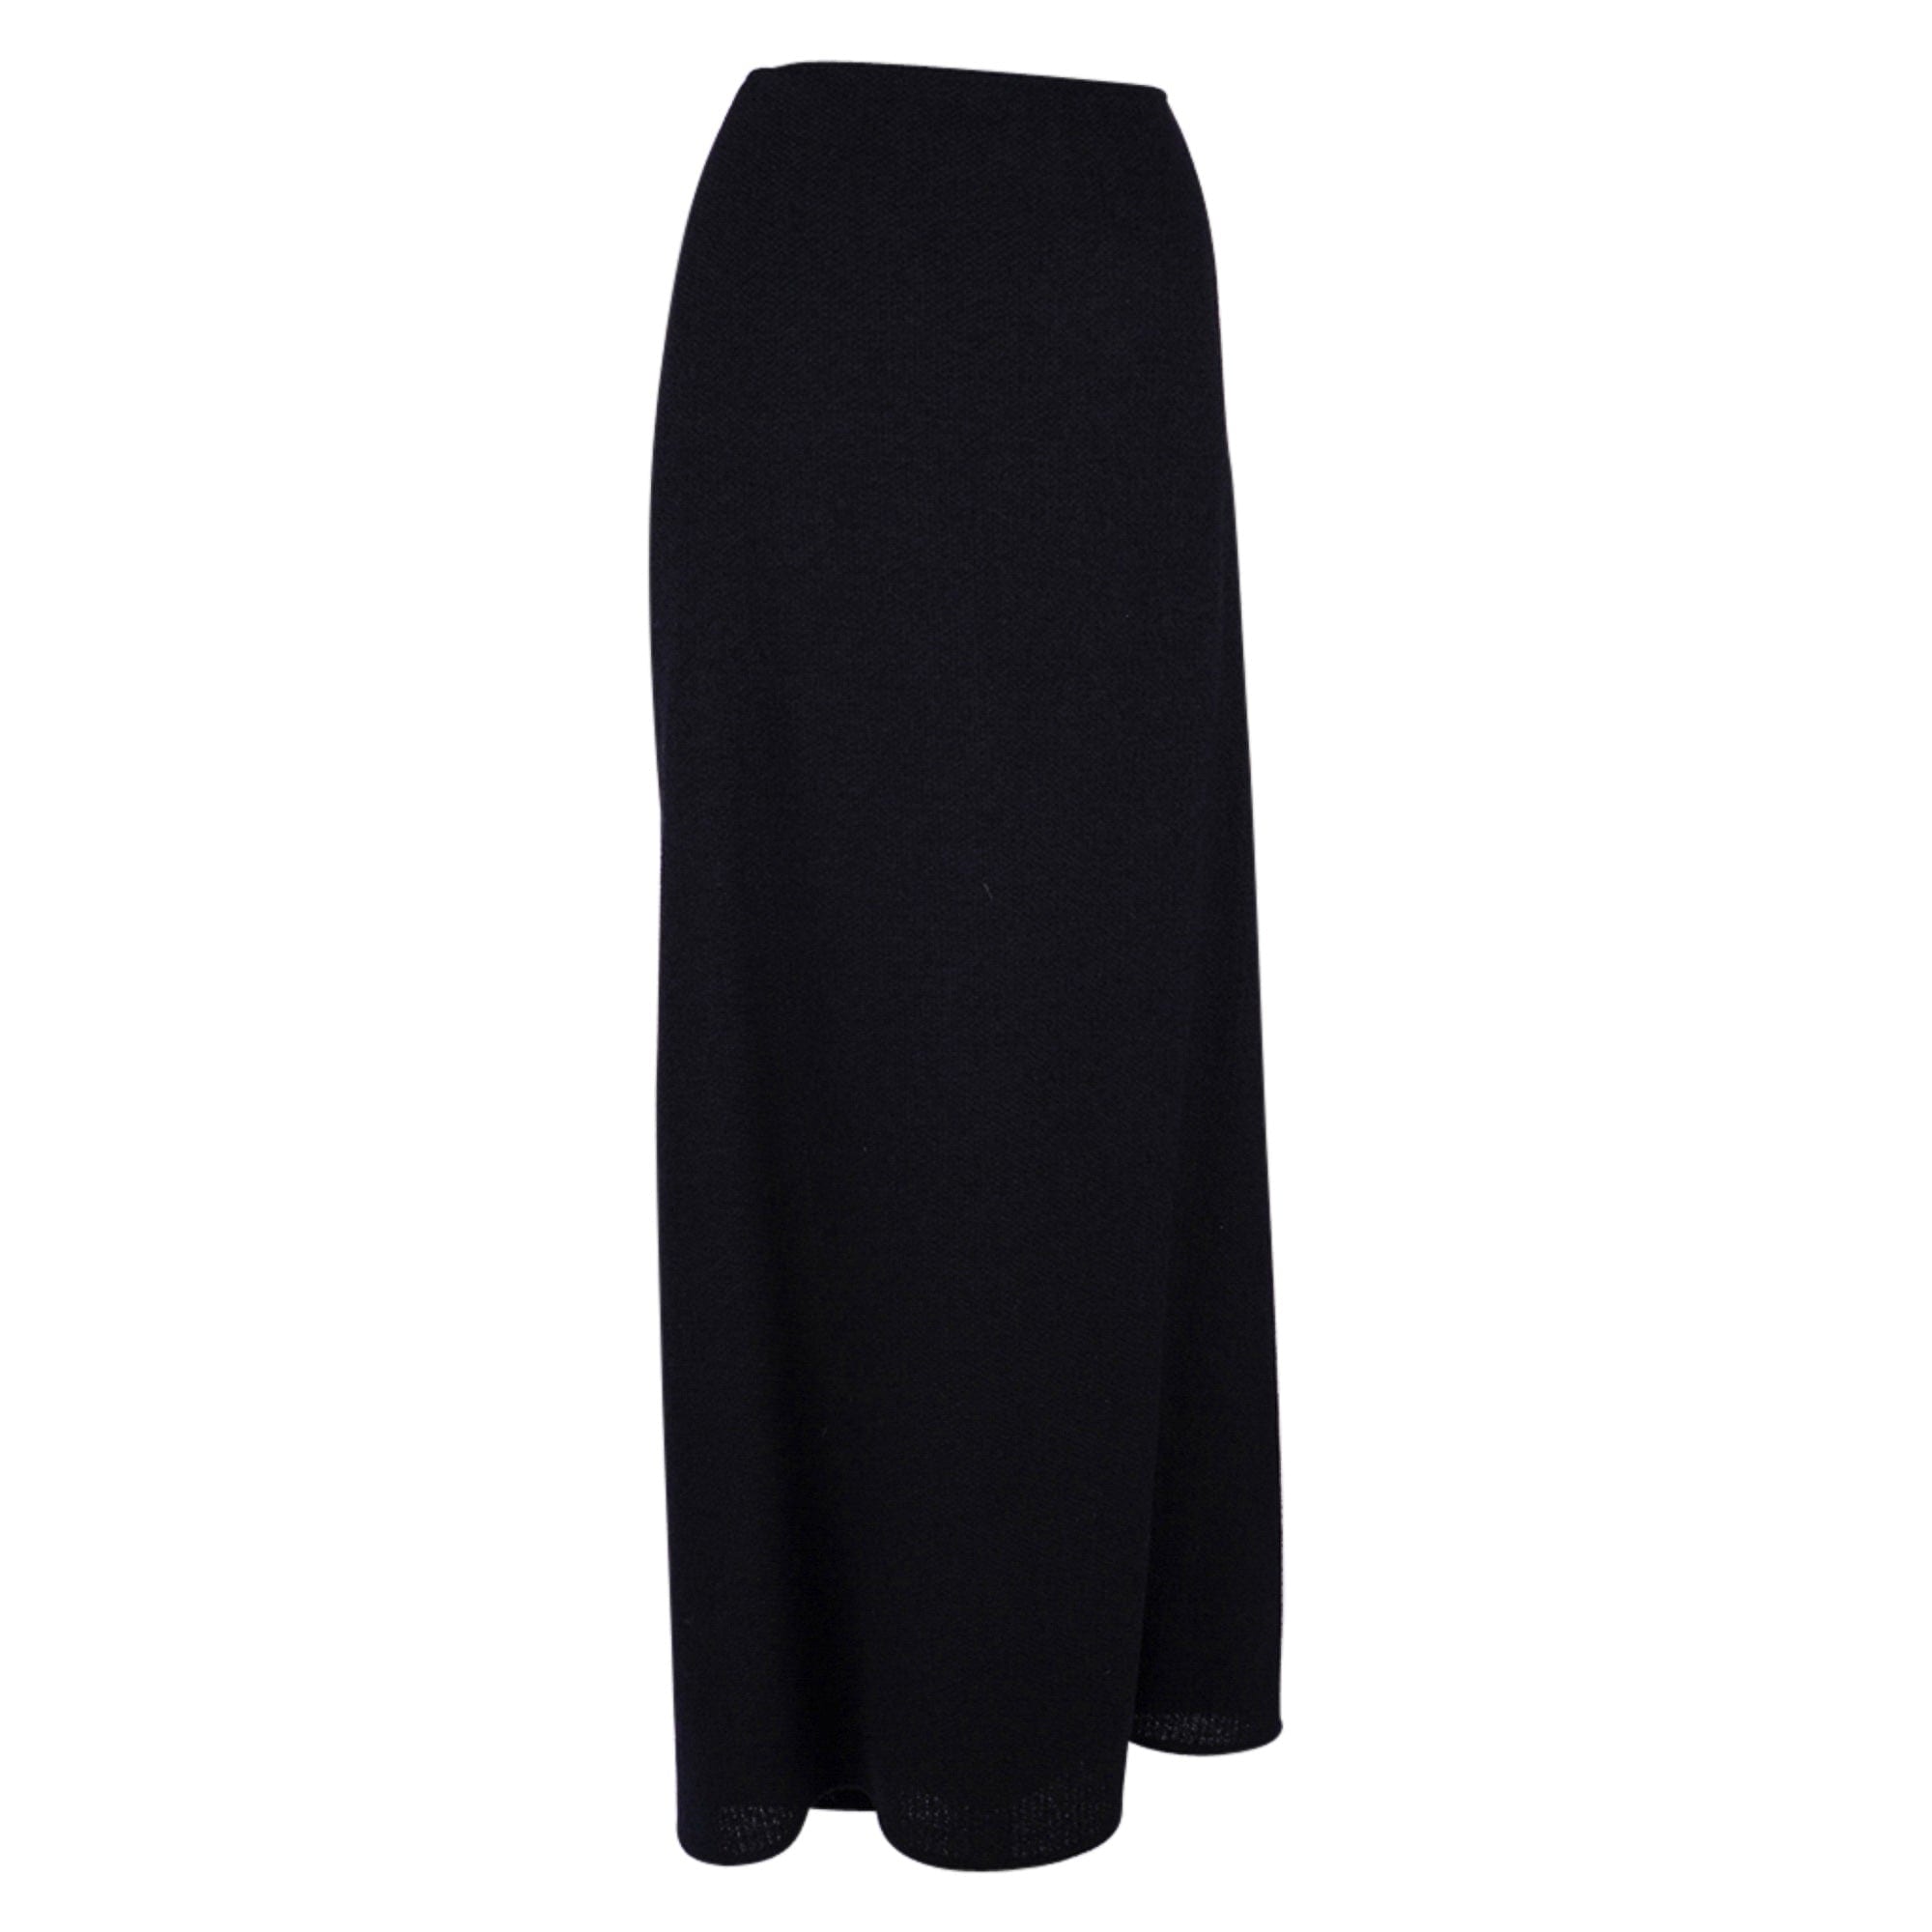 Chanel 98A Skirt Black Long Pencil Draped Rear Detail 36 Fits 4 to  6